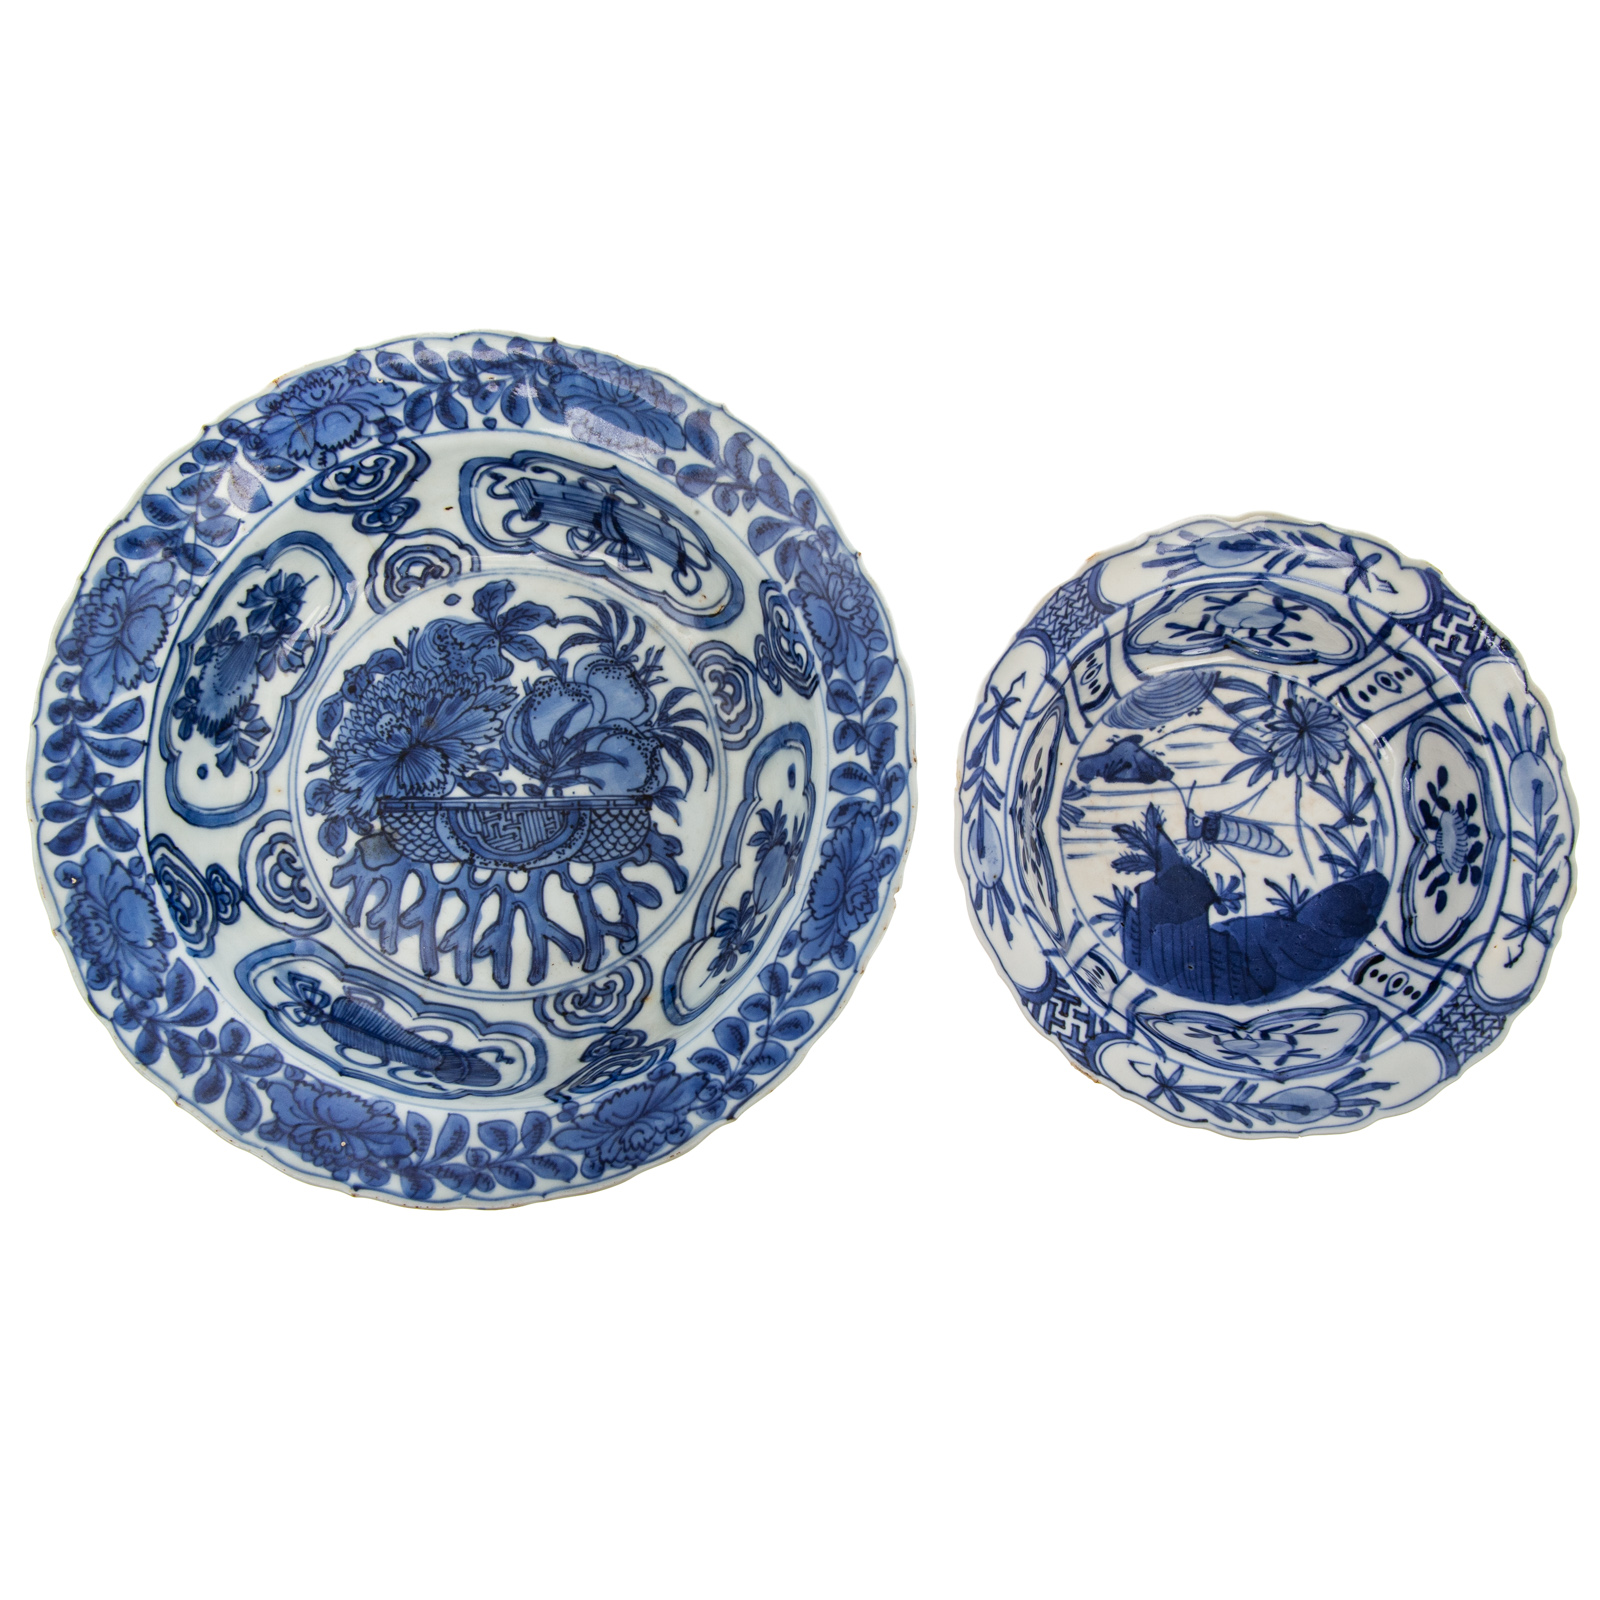 TWO CHINESE EXPORT KRAAK BOWLS